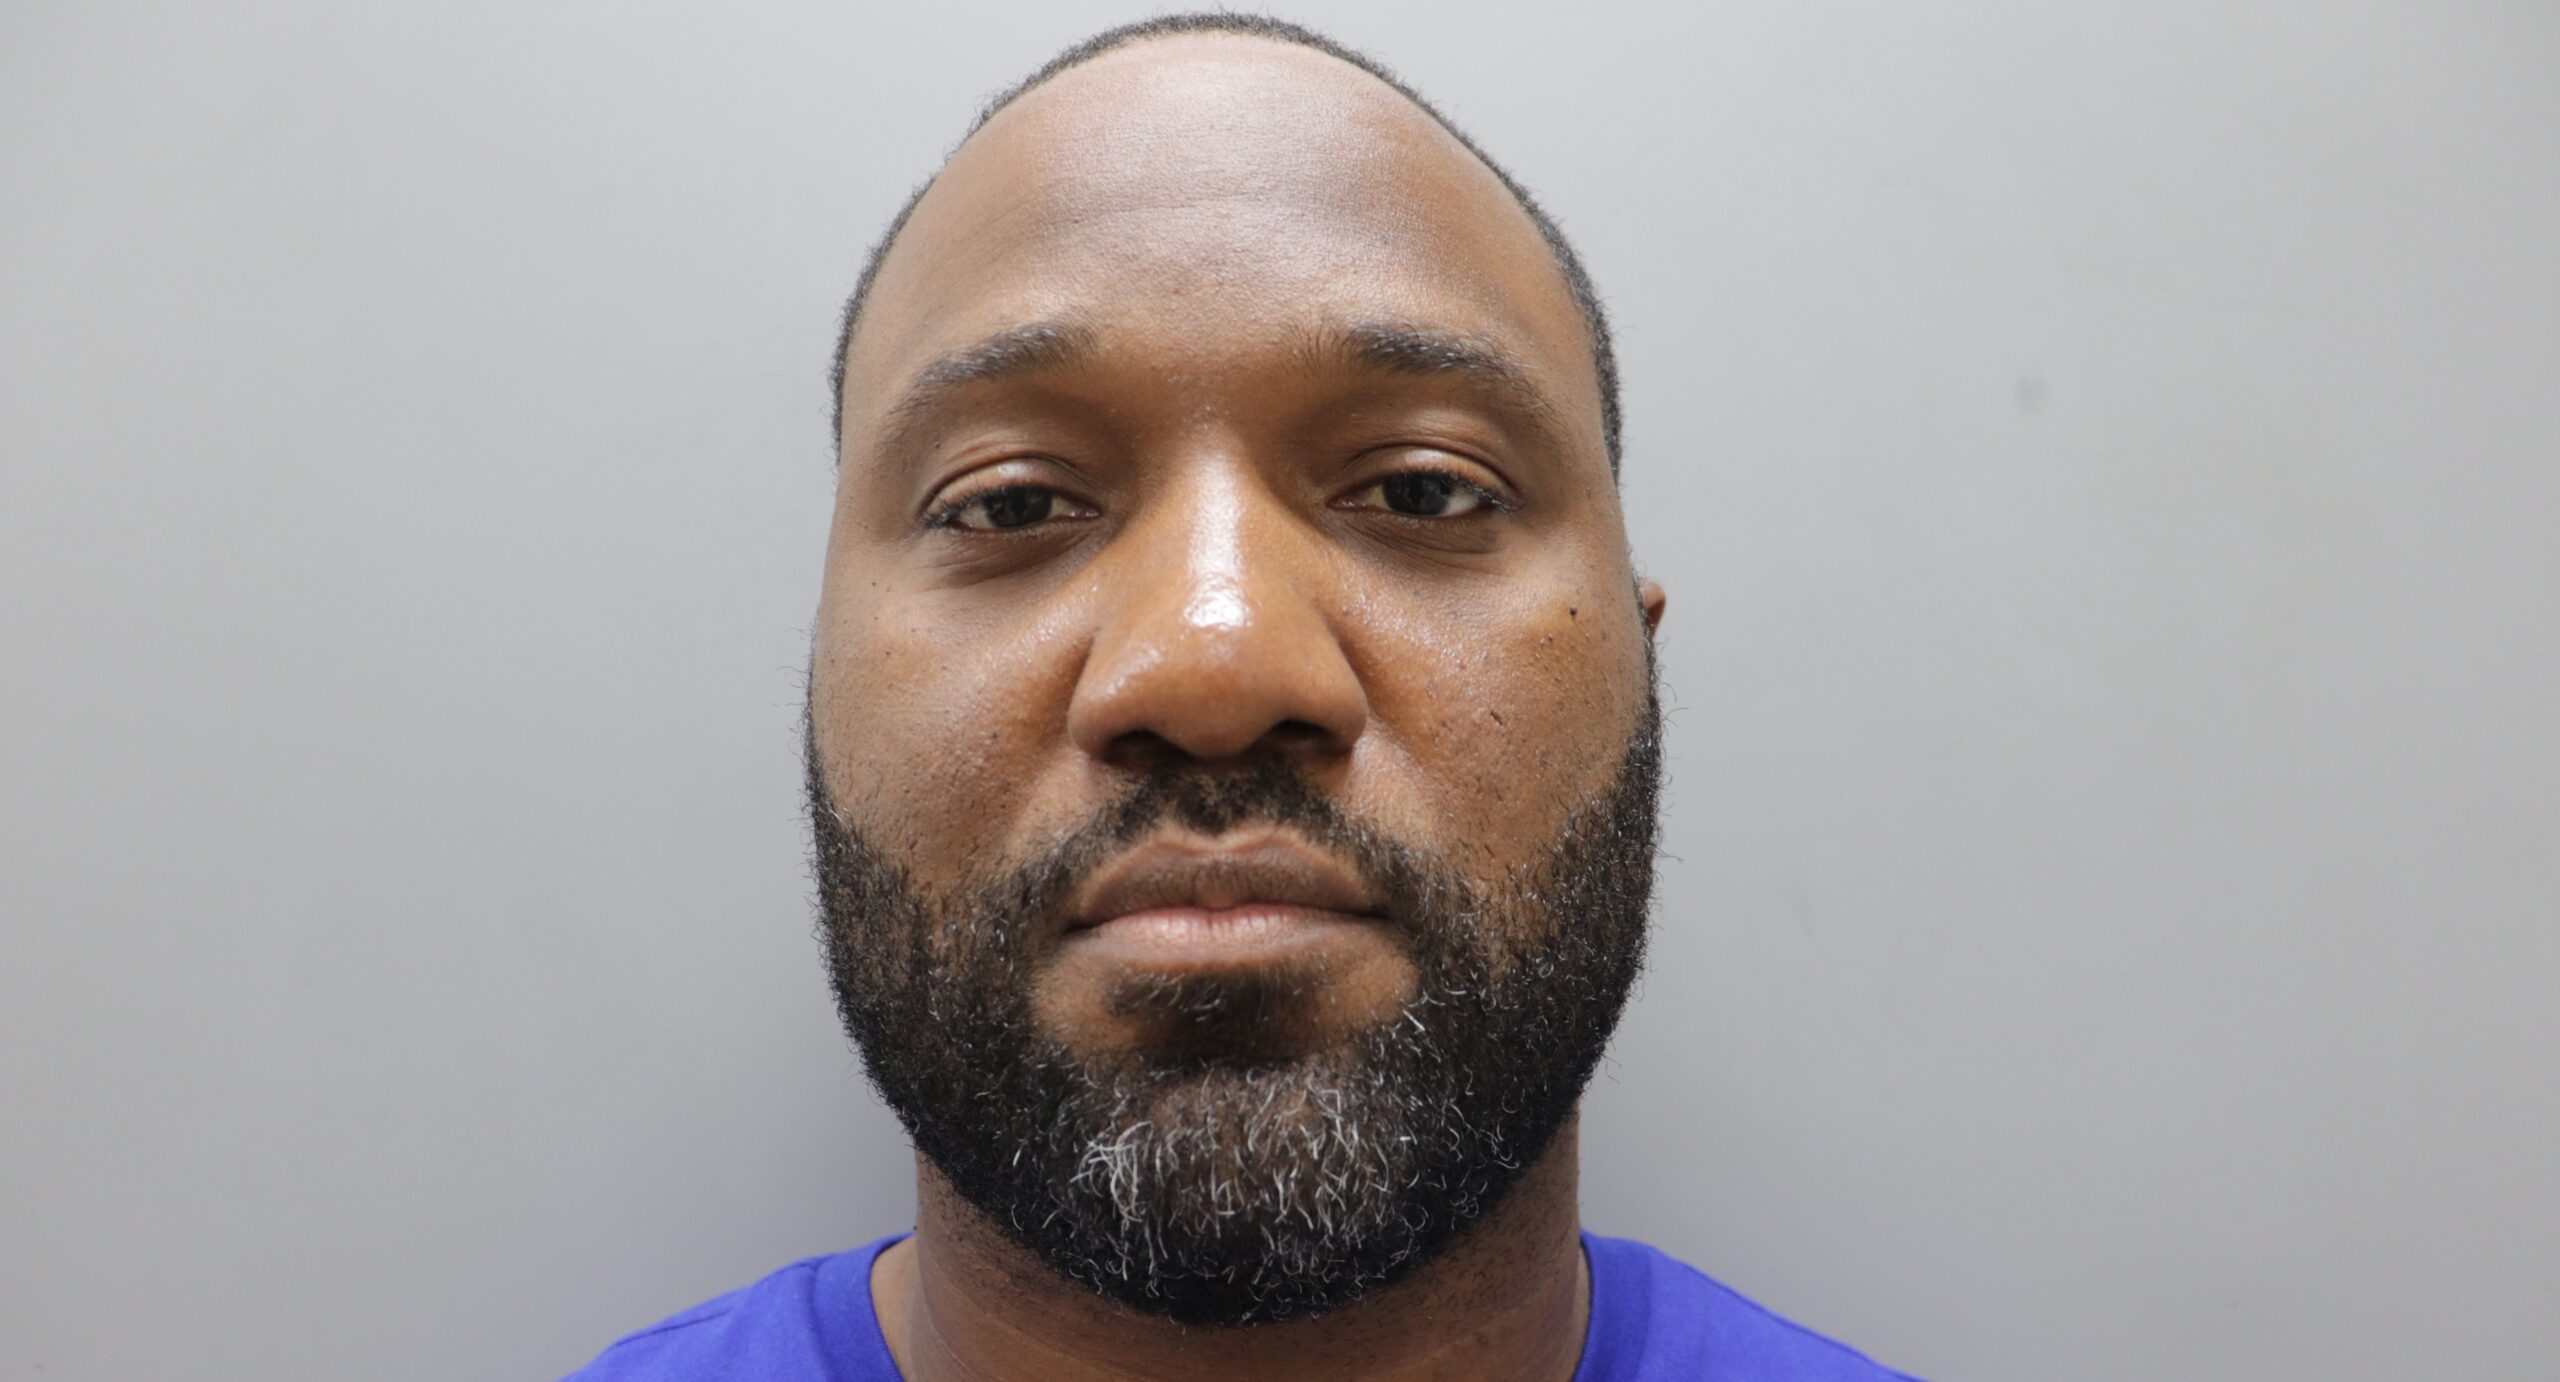 St. Thomas Man Turns Himself In To Police, Arrested On Domestic Violence Charge